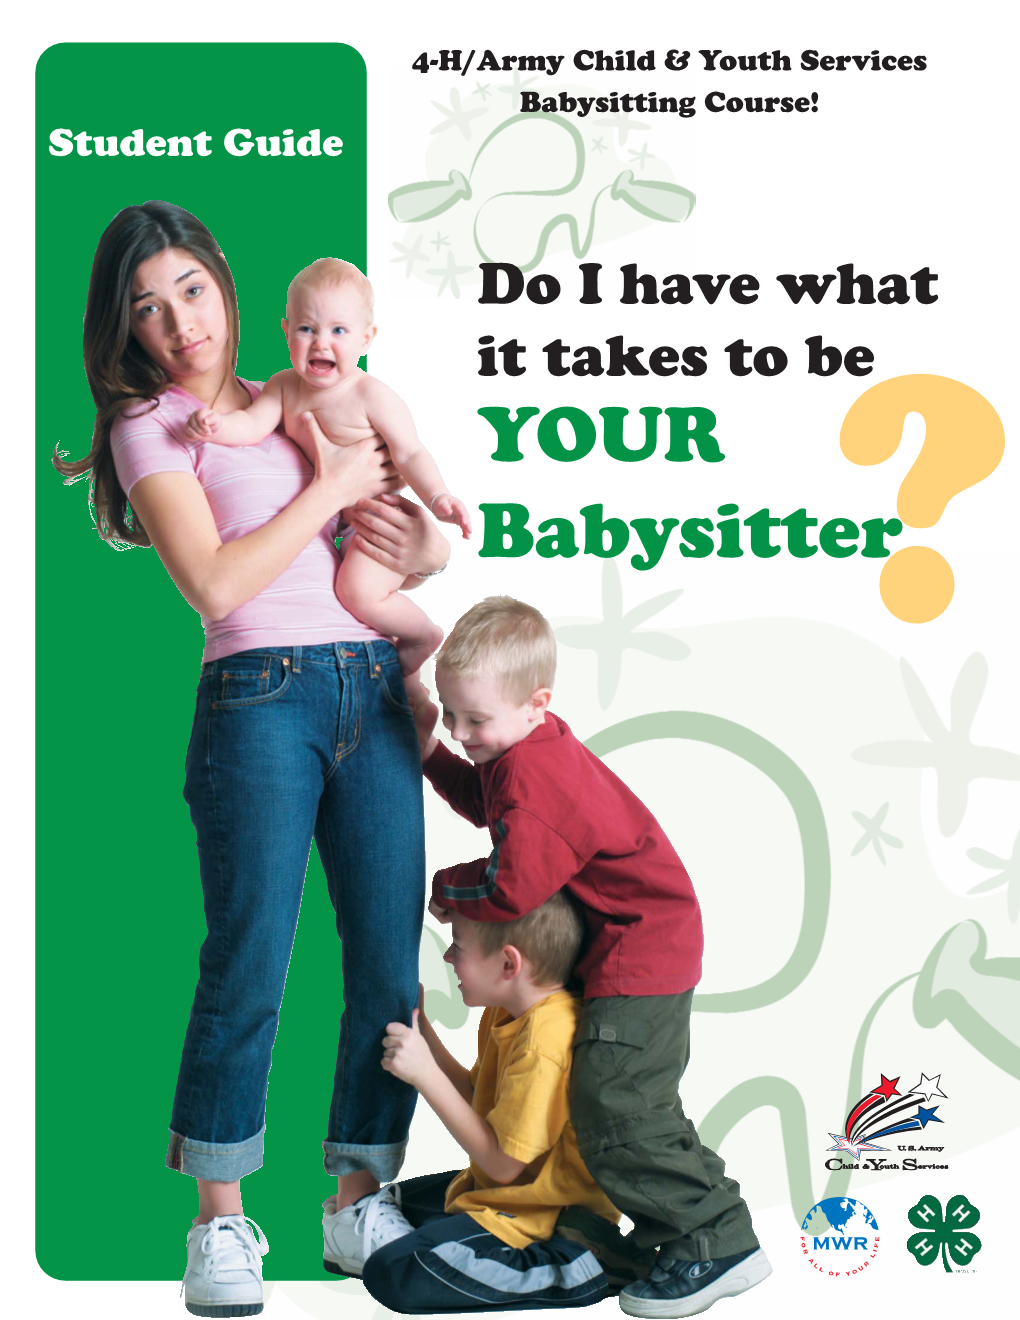 Do I Have What It Takes to Be YOUR Babysitter?